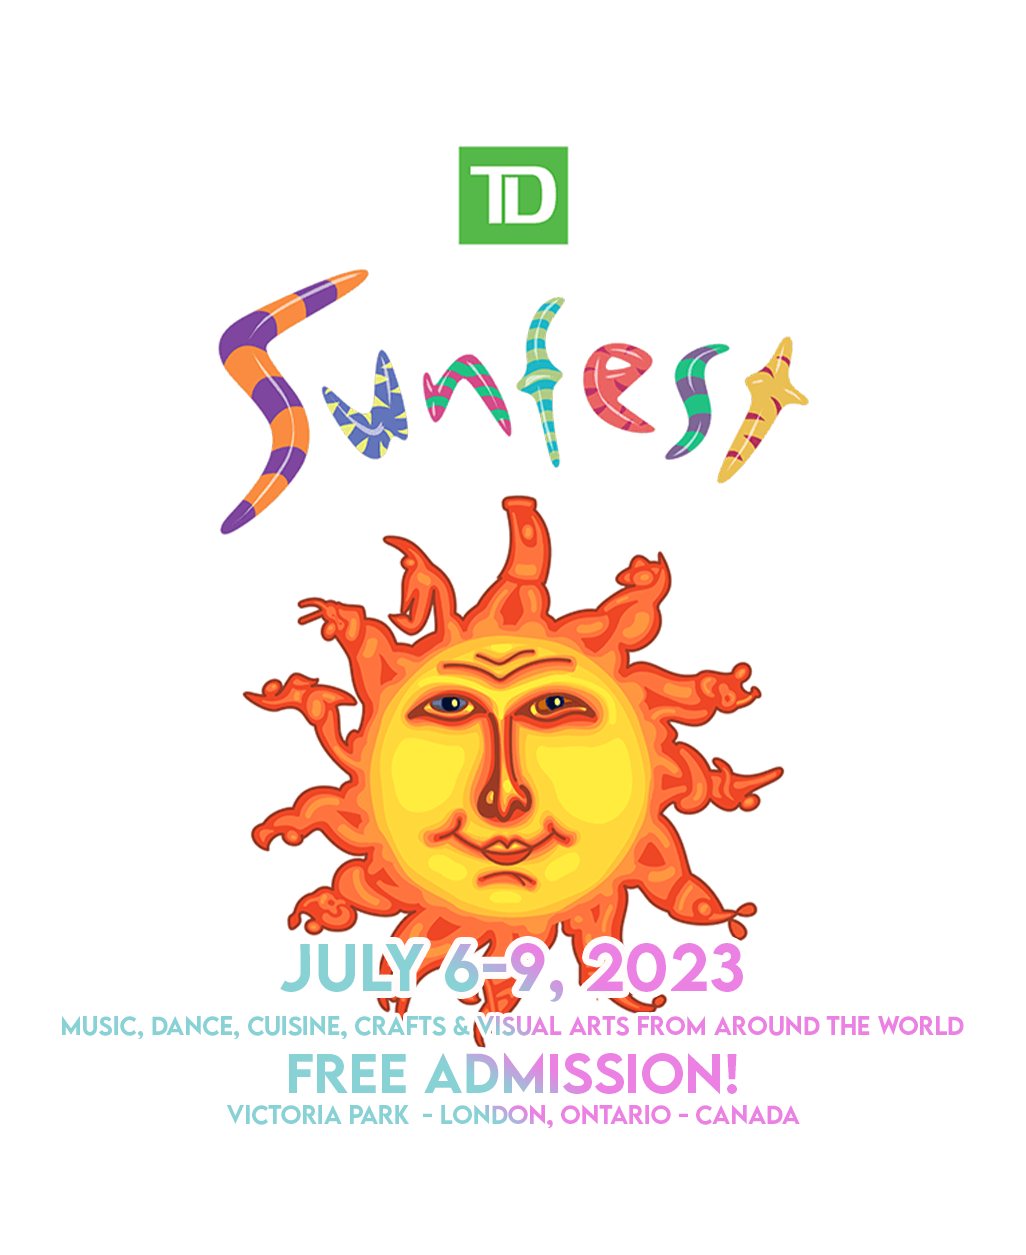 We are at Sunfest London Ontario